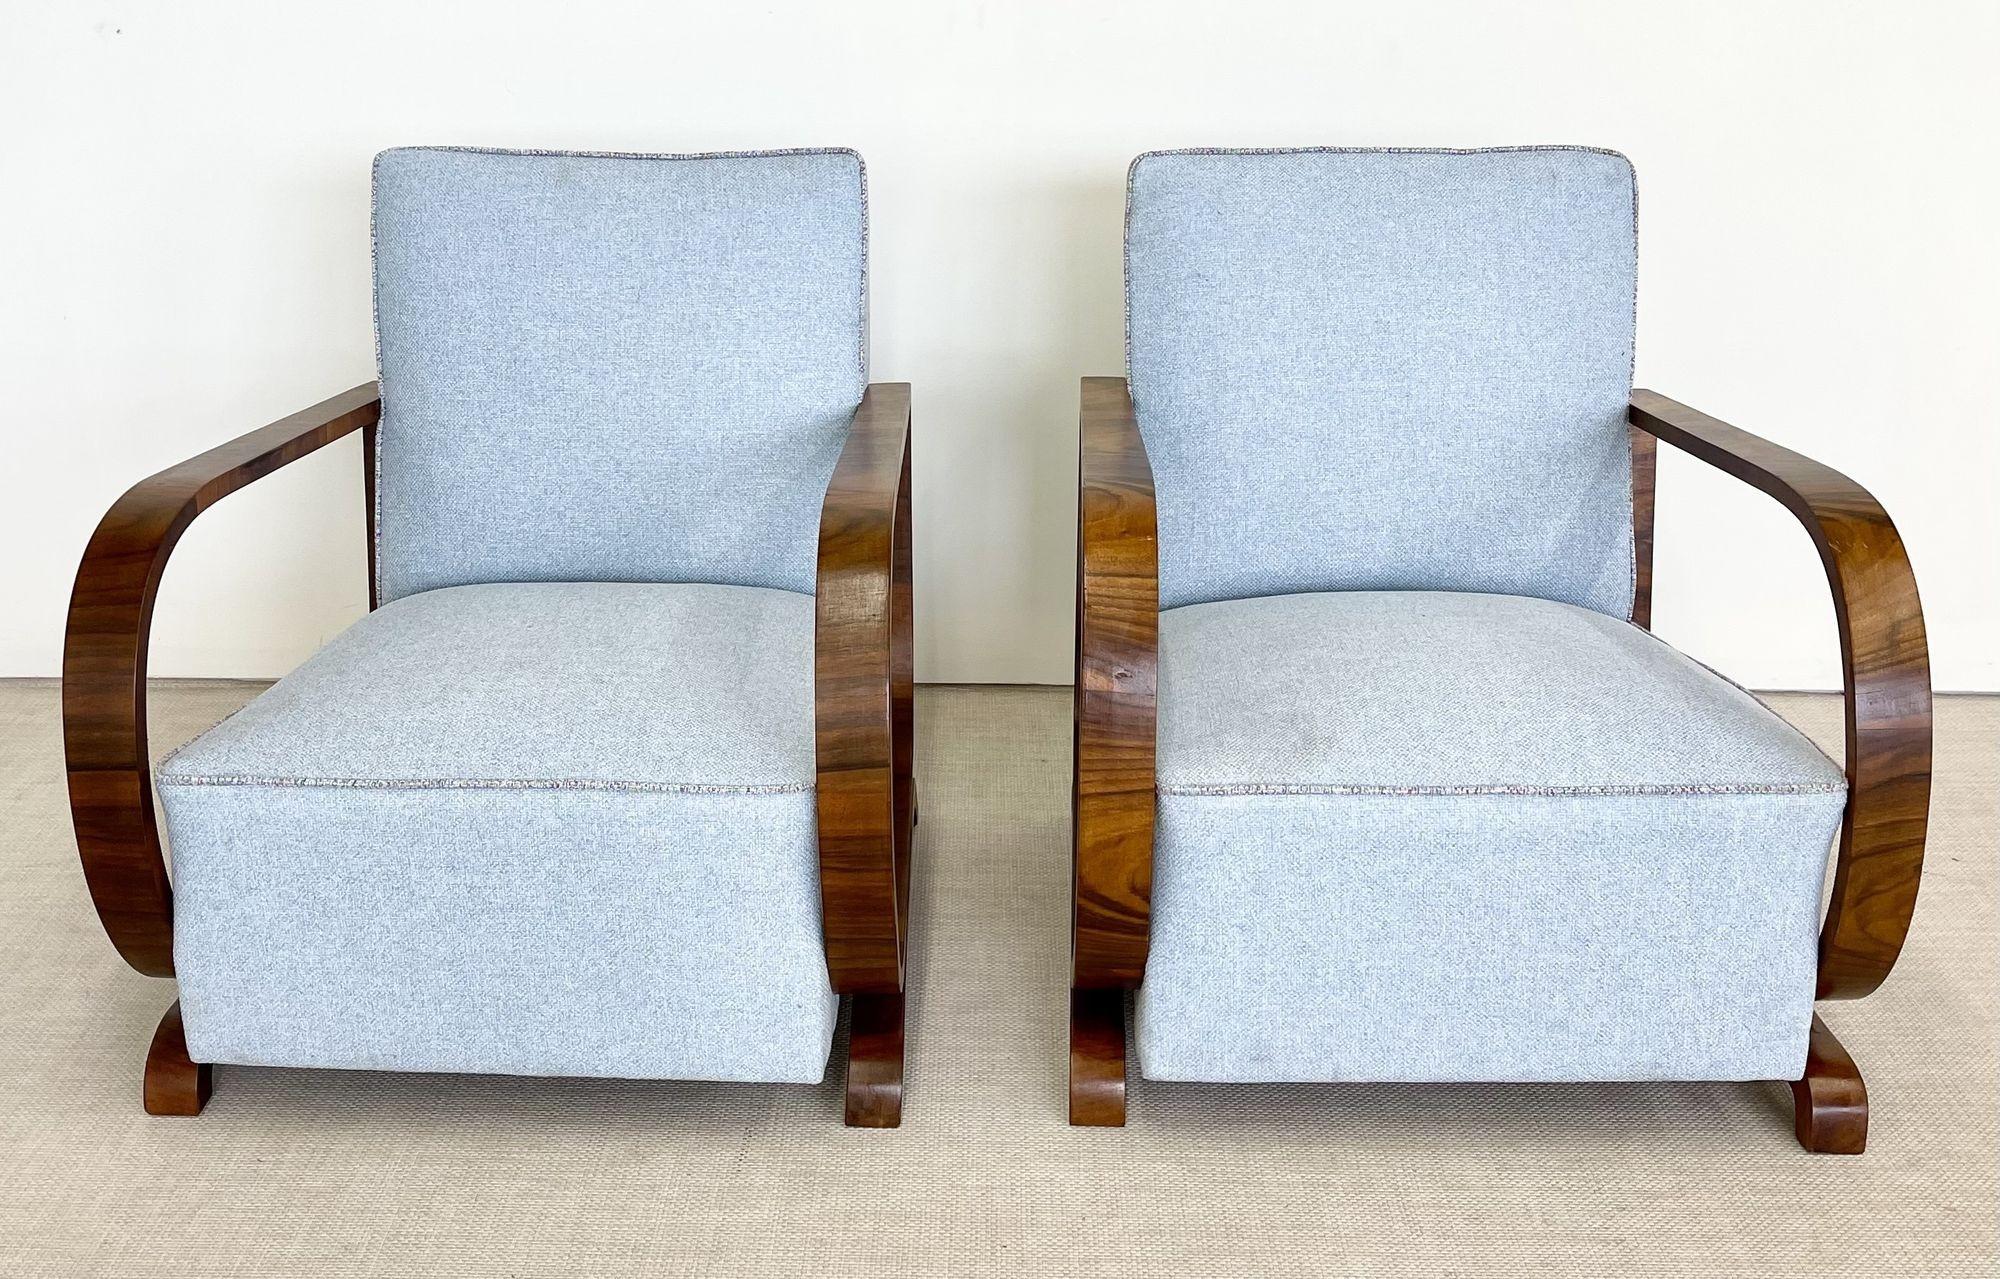 Pair of Art Deco Lounge / Arm Chairs, Walnut, Fabric, Mid-Century Style, Sweden 1